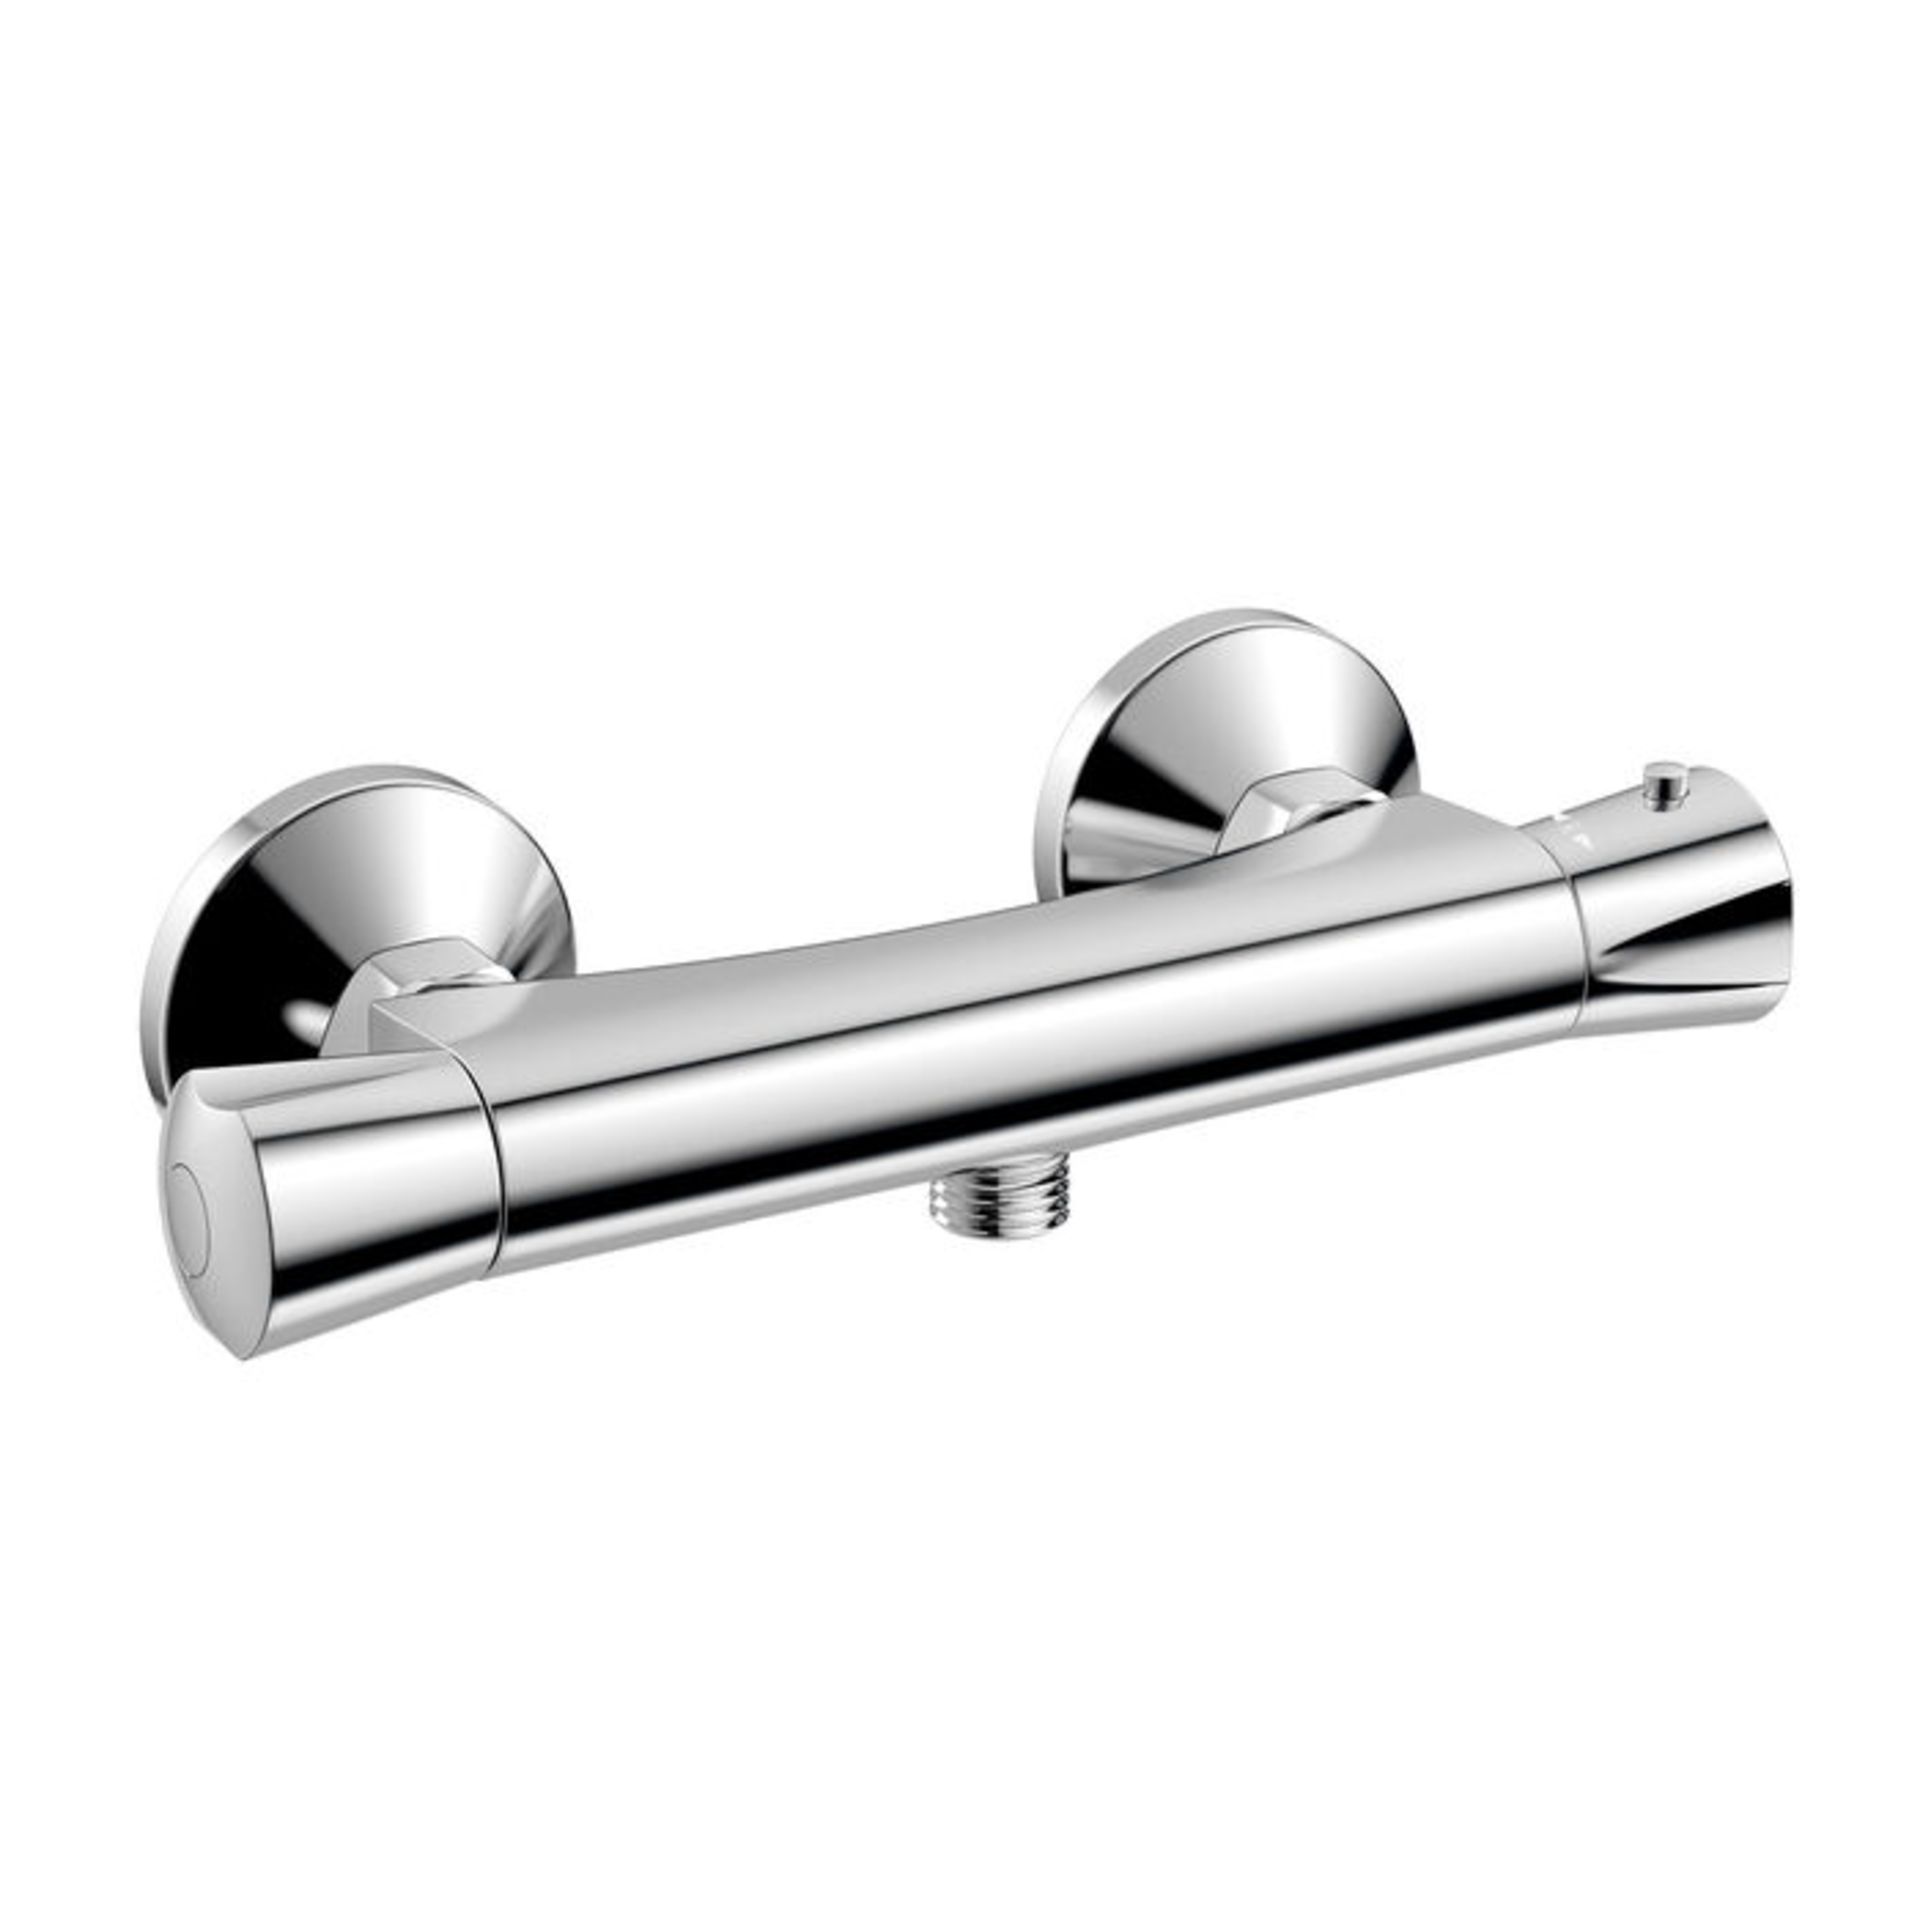 (NV1031) Thermostatic Shower Valve - Round Bar Mixer Chrome plated solid brass mixer Cool to ... - Image 2 of 2